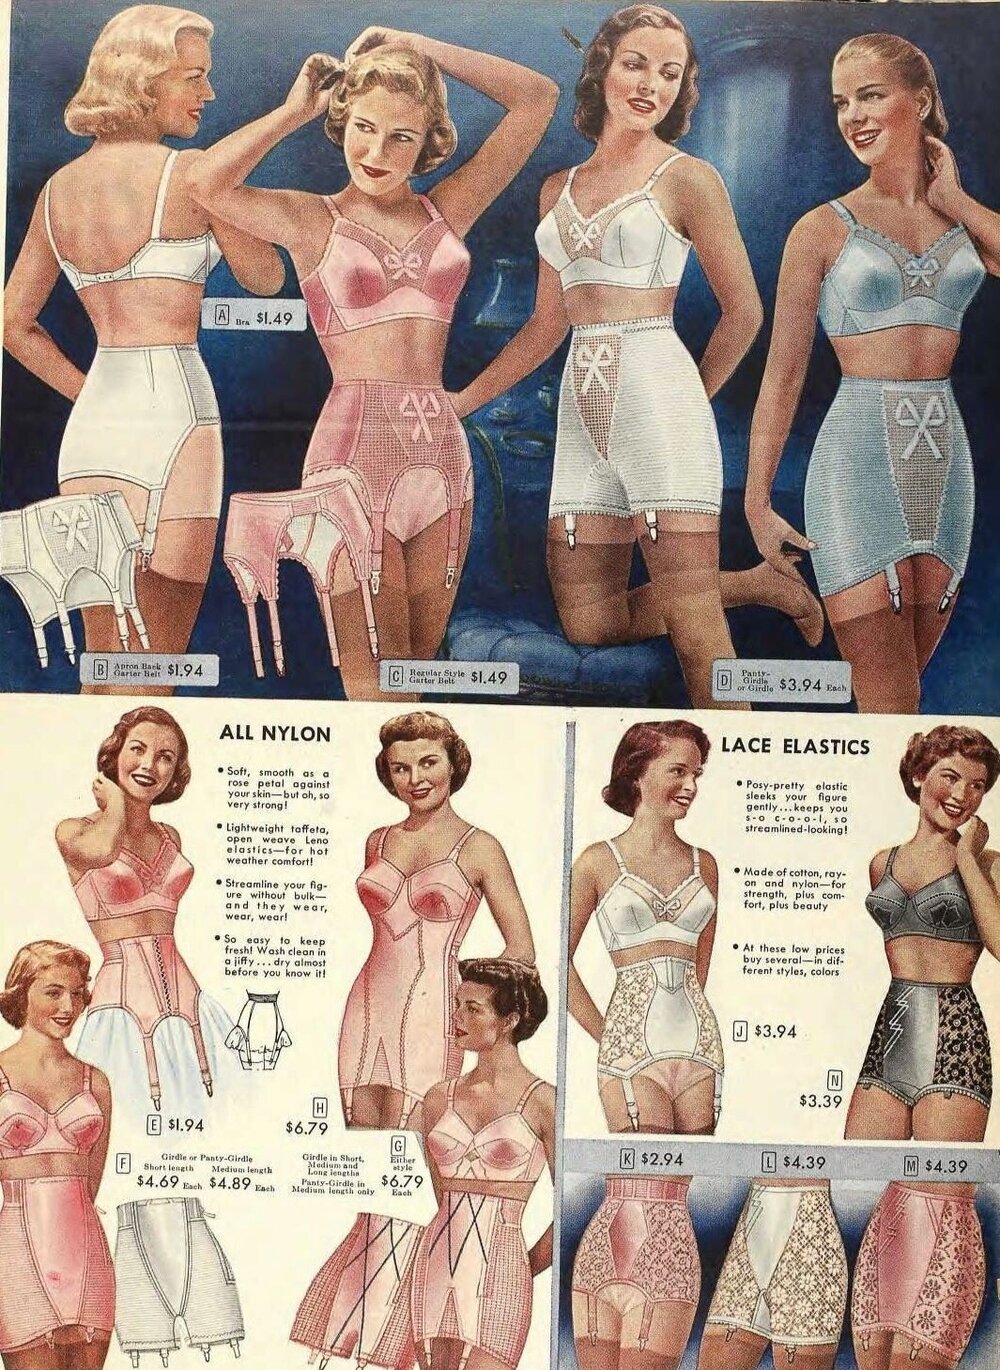 1950s Ladies Lingerie Porn - Playlists: songs about underwear â€” Song Bar